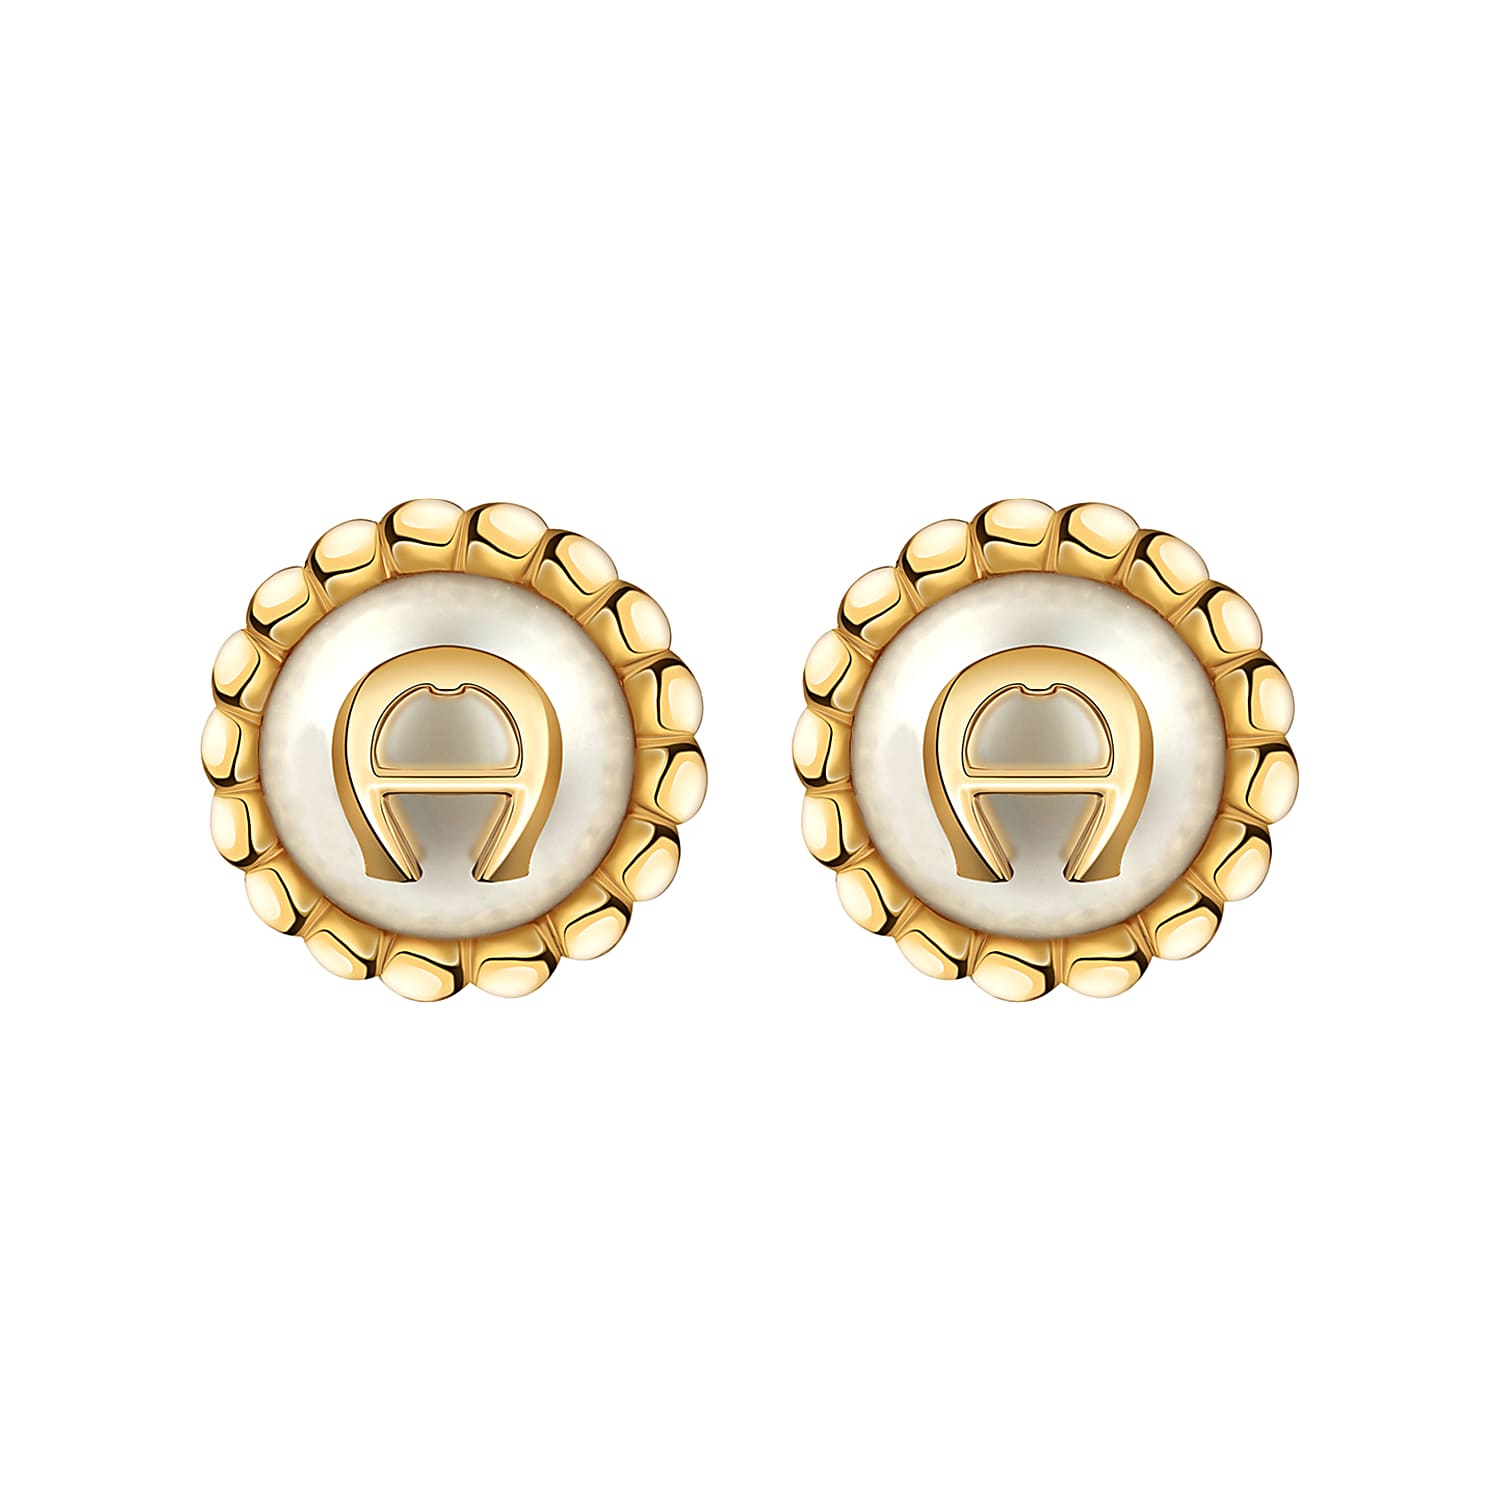 Pearl earrings with A Logo